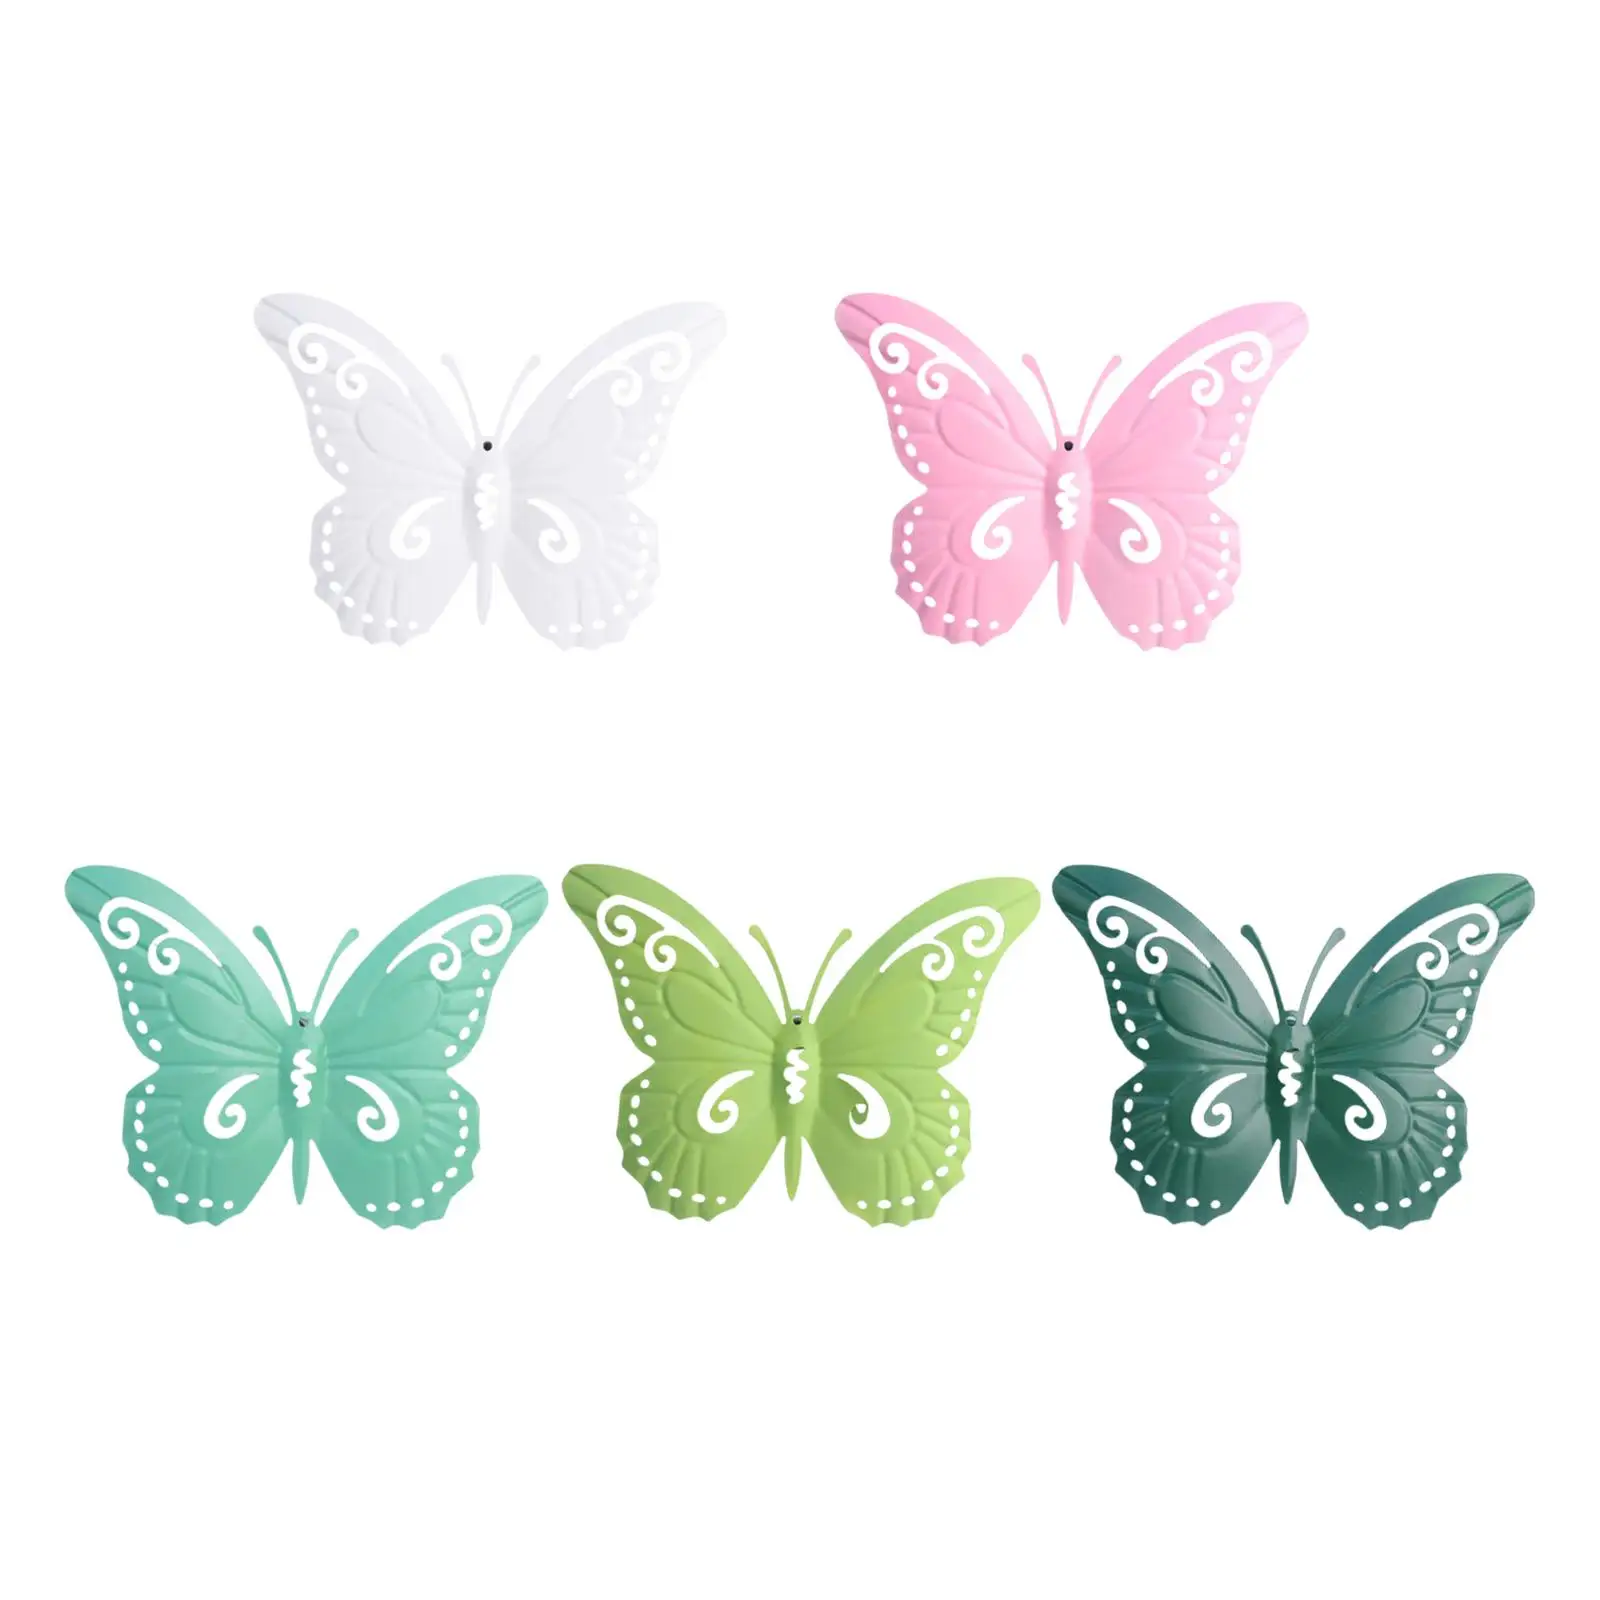 3D Butterfly Wall Decor Decorative Sculpture for Living Room Porch Bedroom